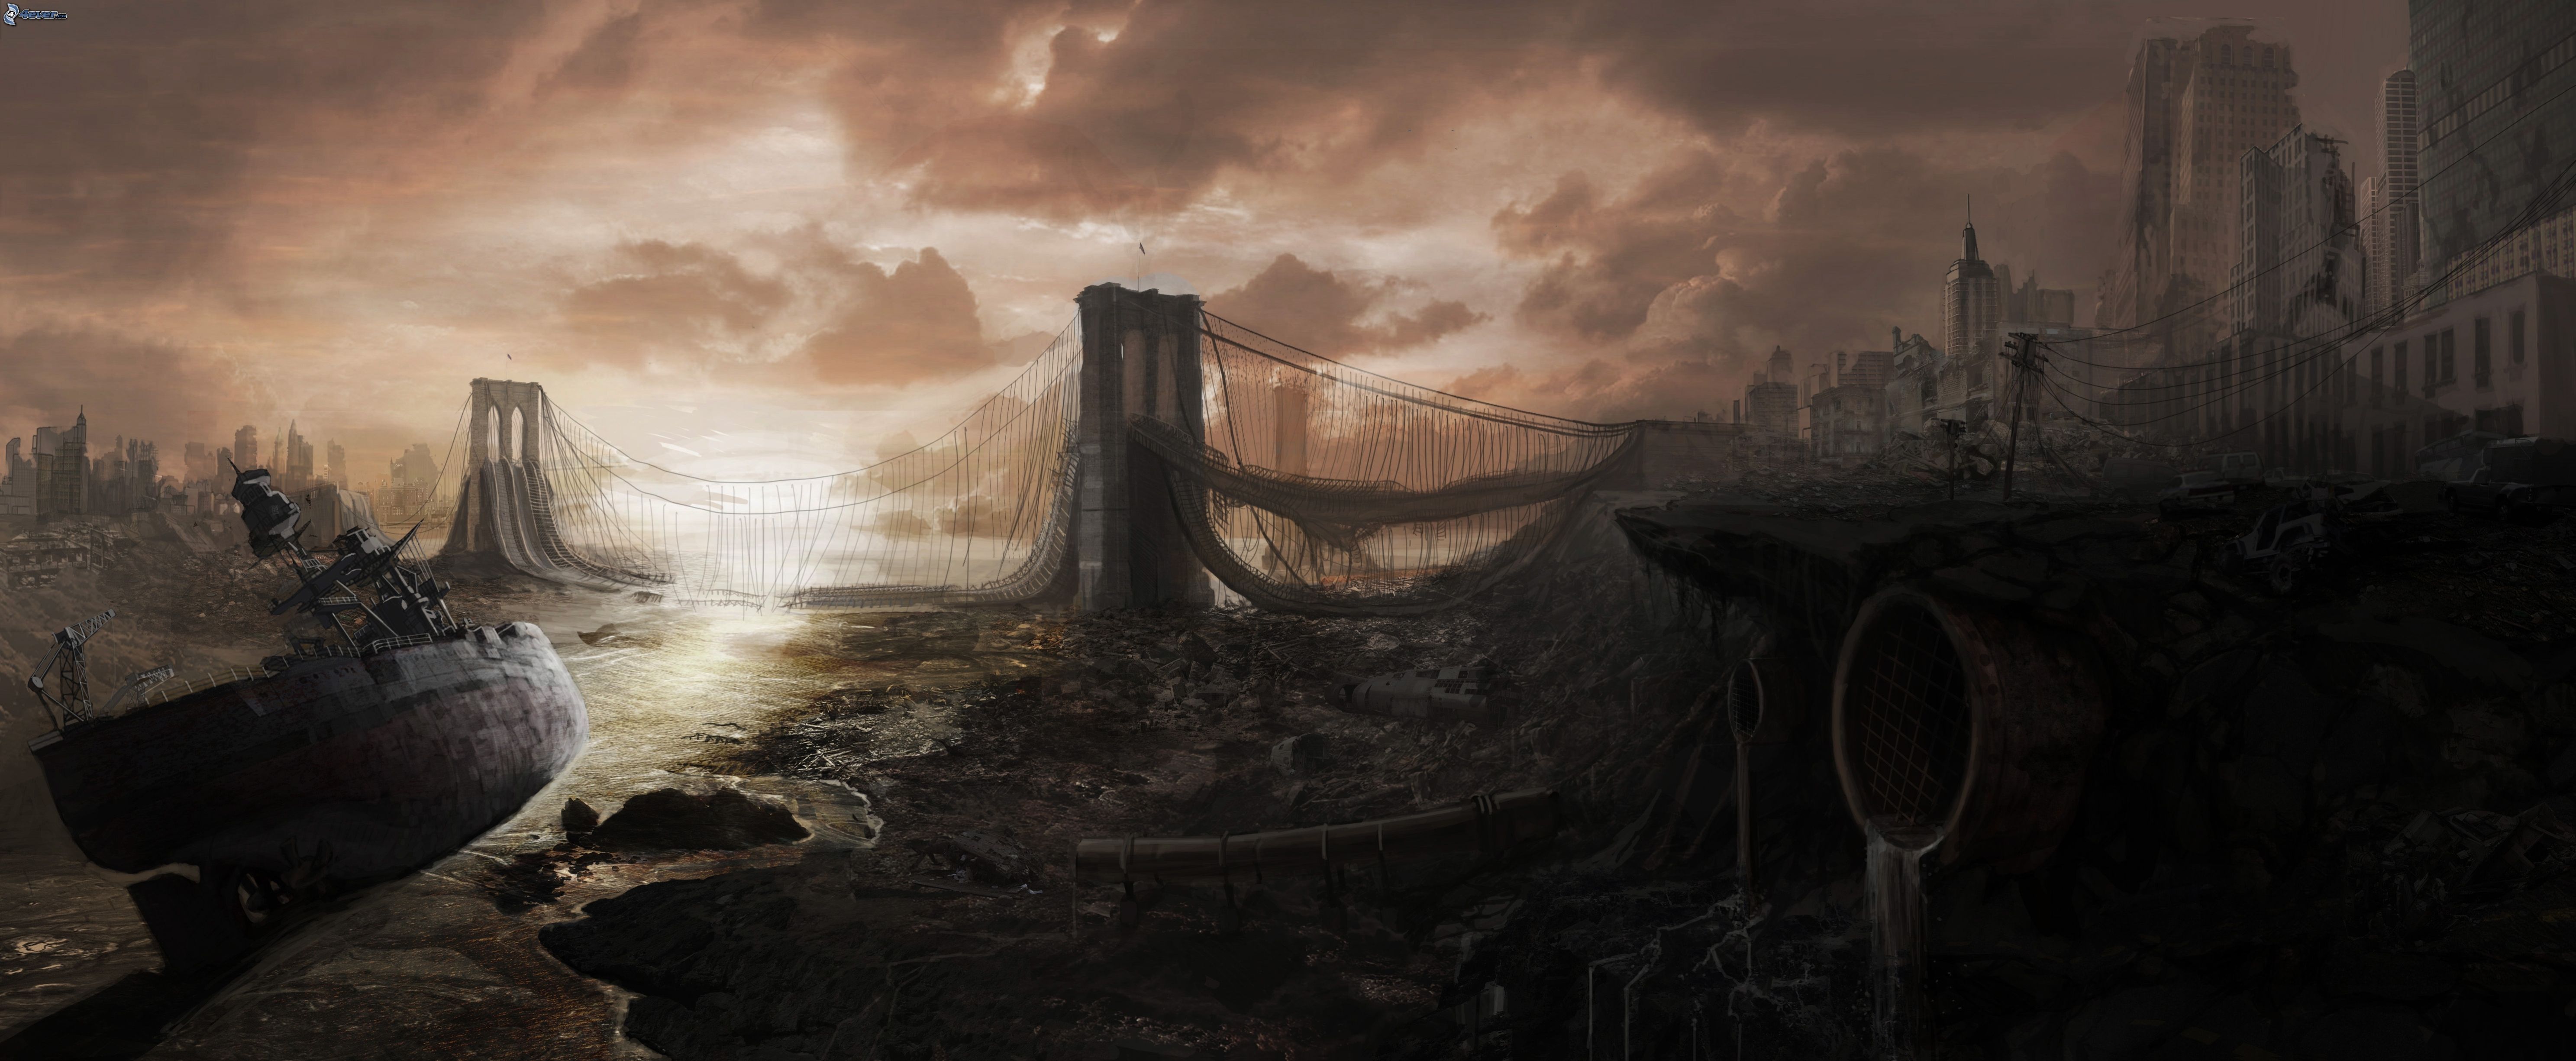 Small Girl In Post Apocalyptic Wallpapers